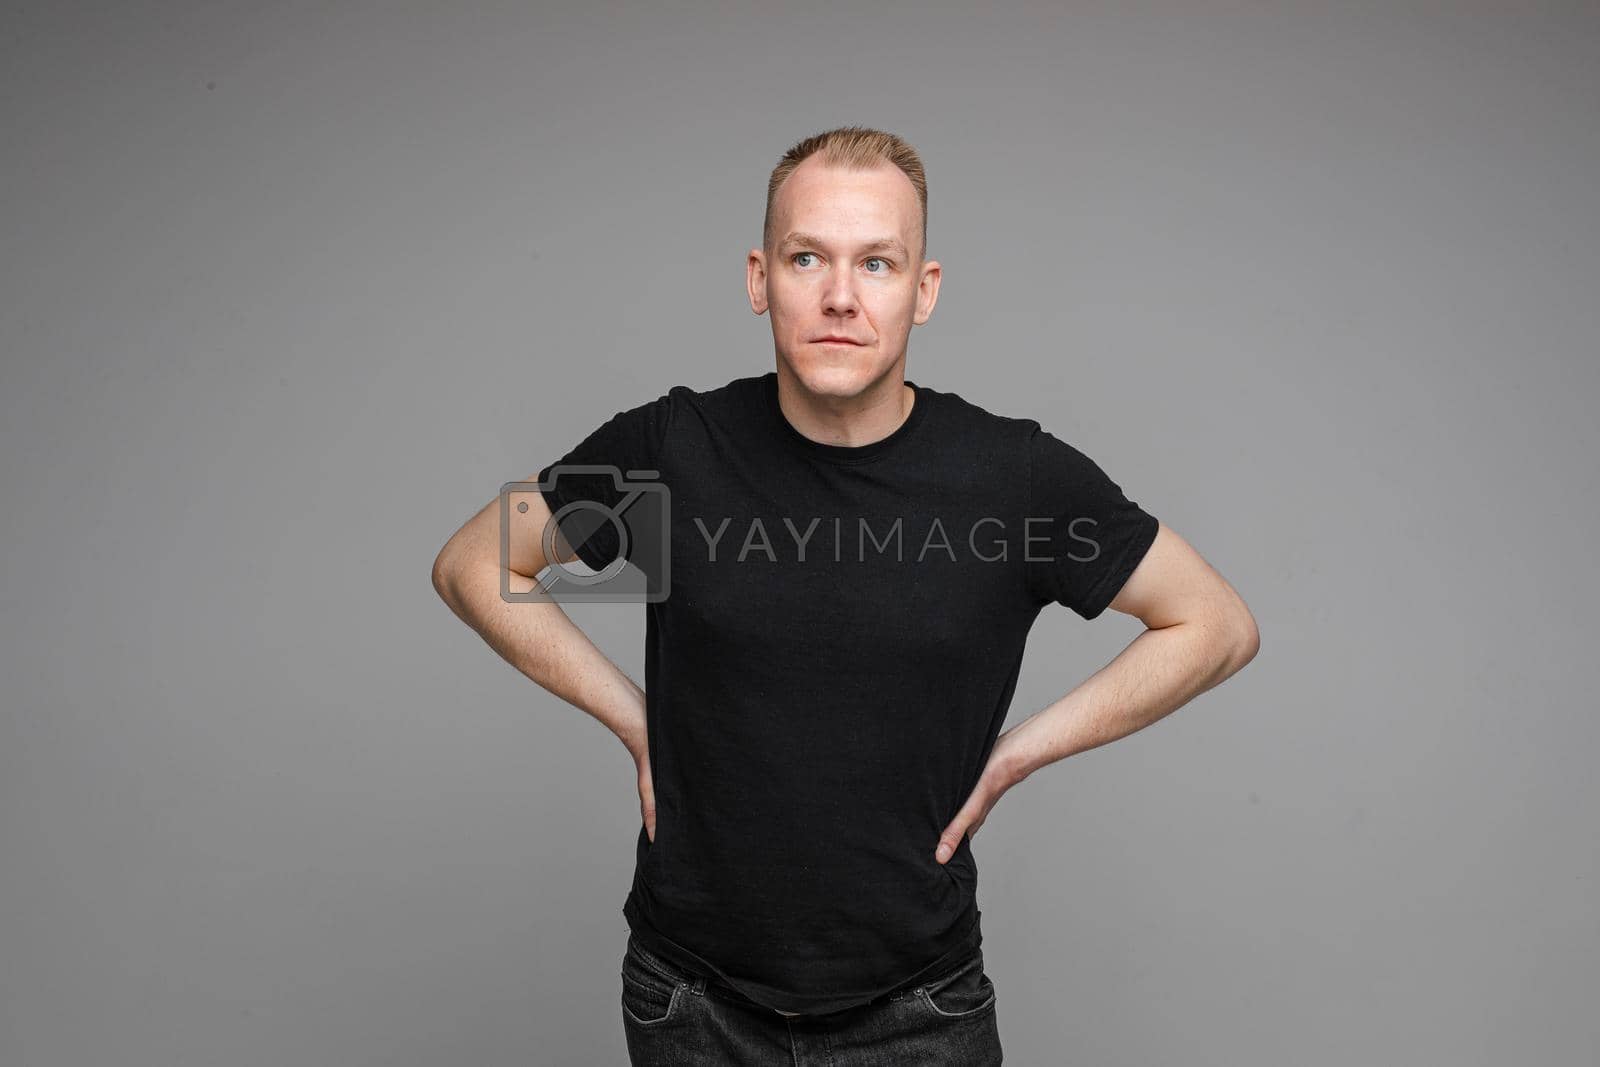 Royalty free image of attractive man with short fair hair wearing a black t-shirt and jeans keeps hands on the belt by StudioLucky